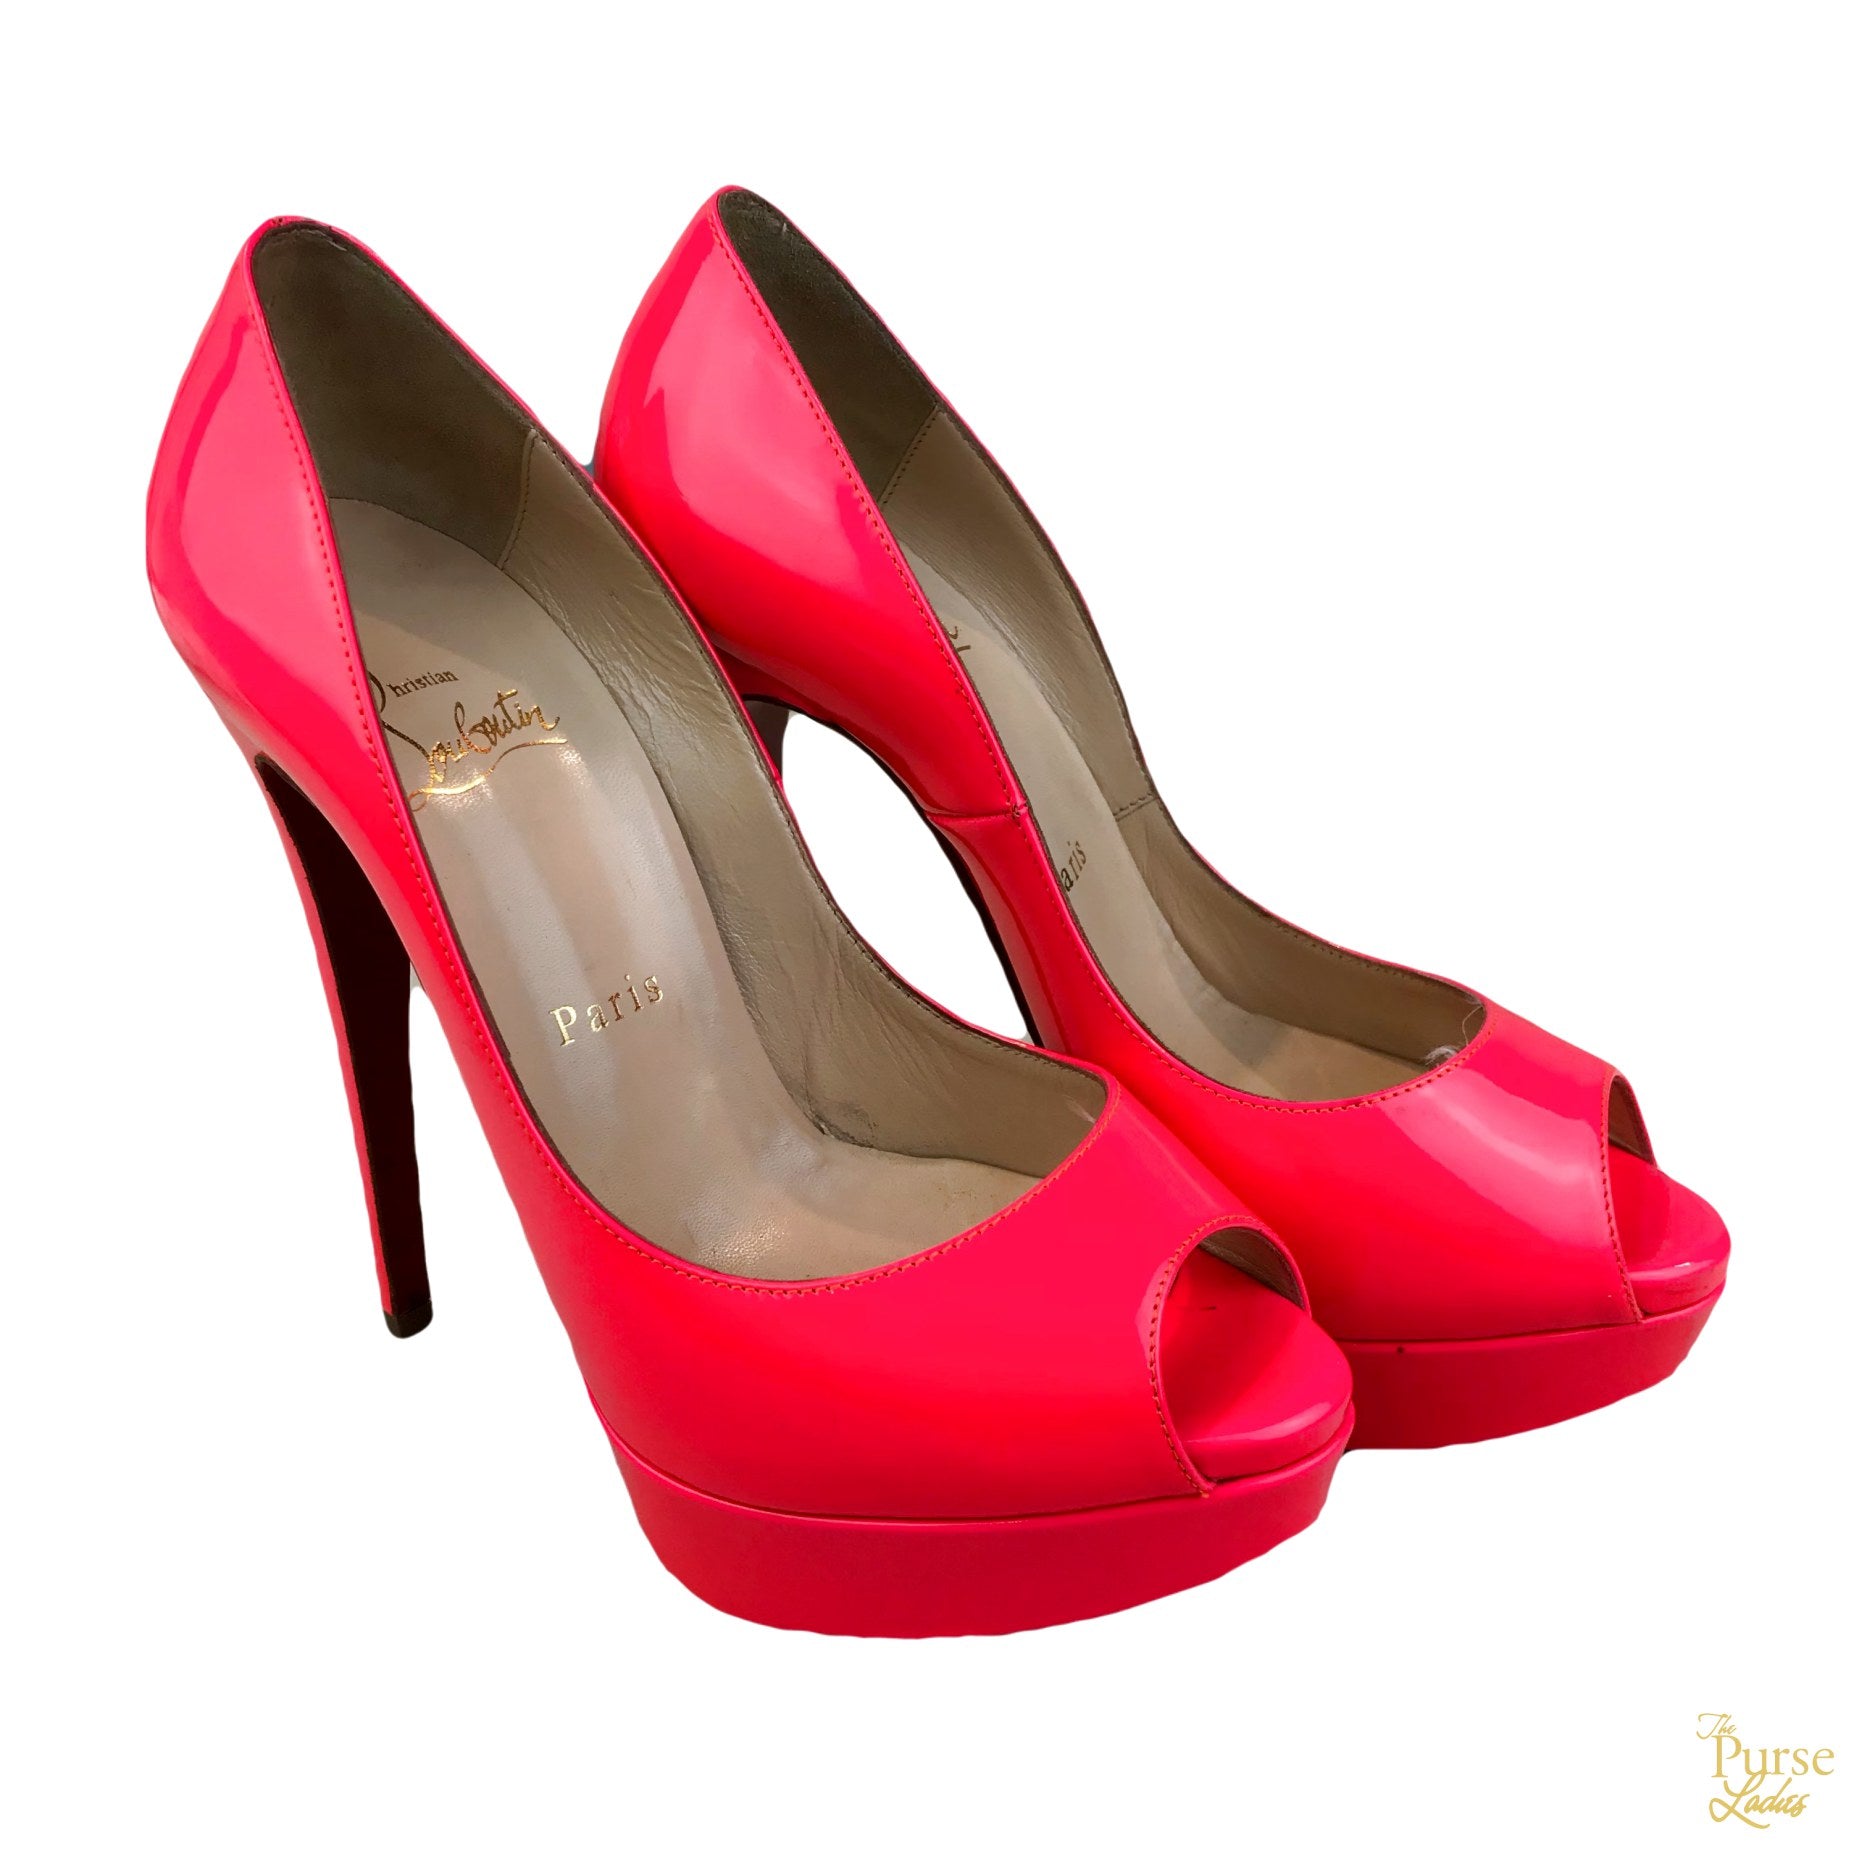 hot pink patent leather heels